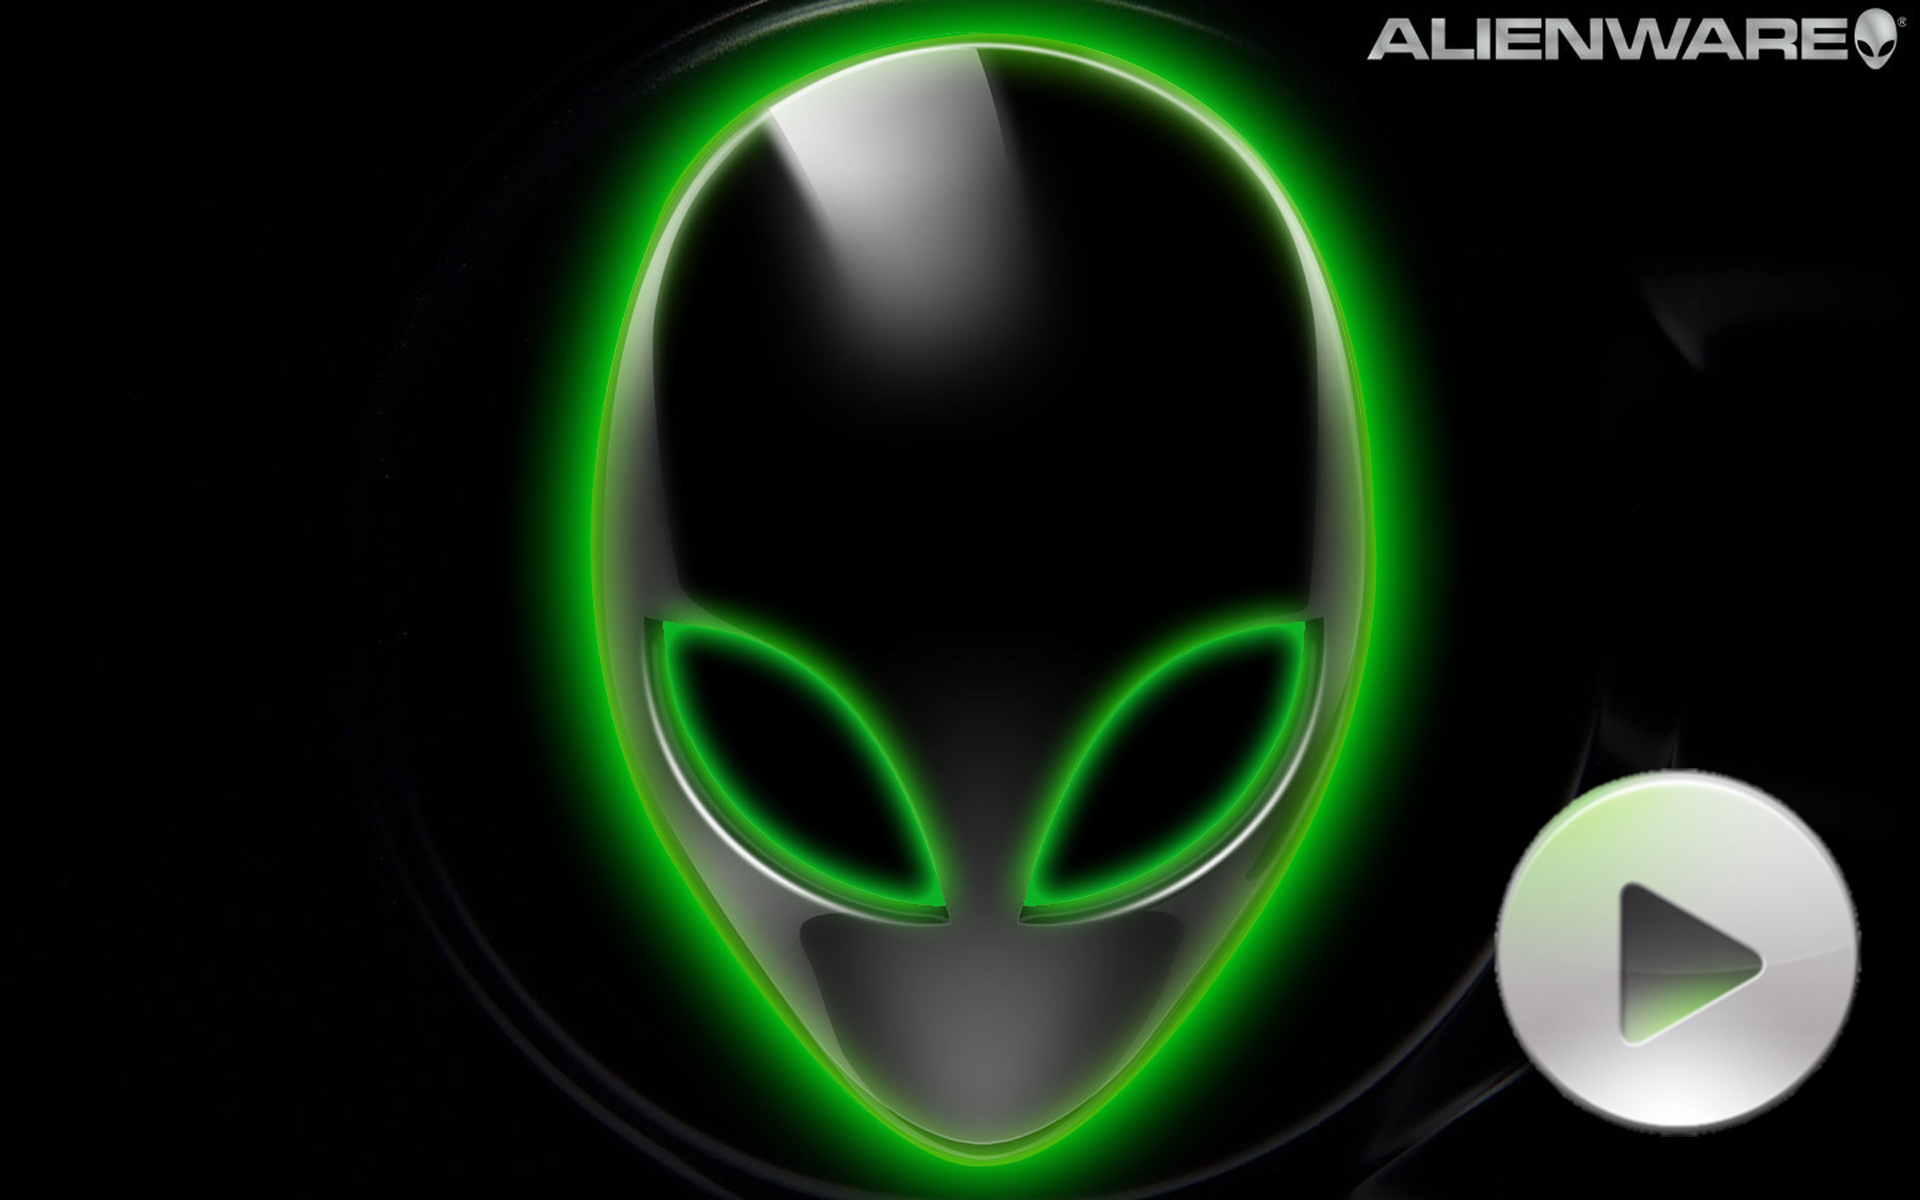 alienware themes for vista free download Top windows 7 themes